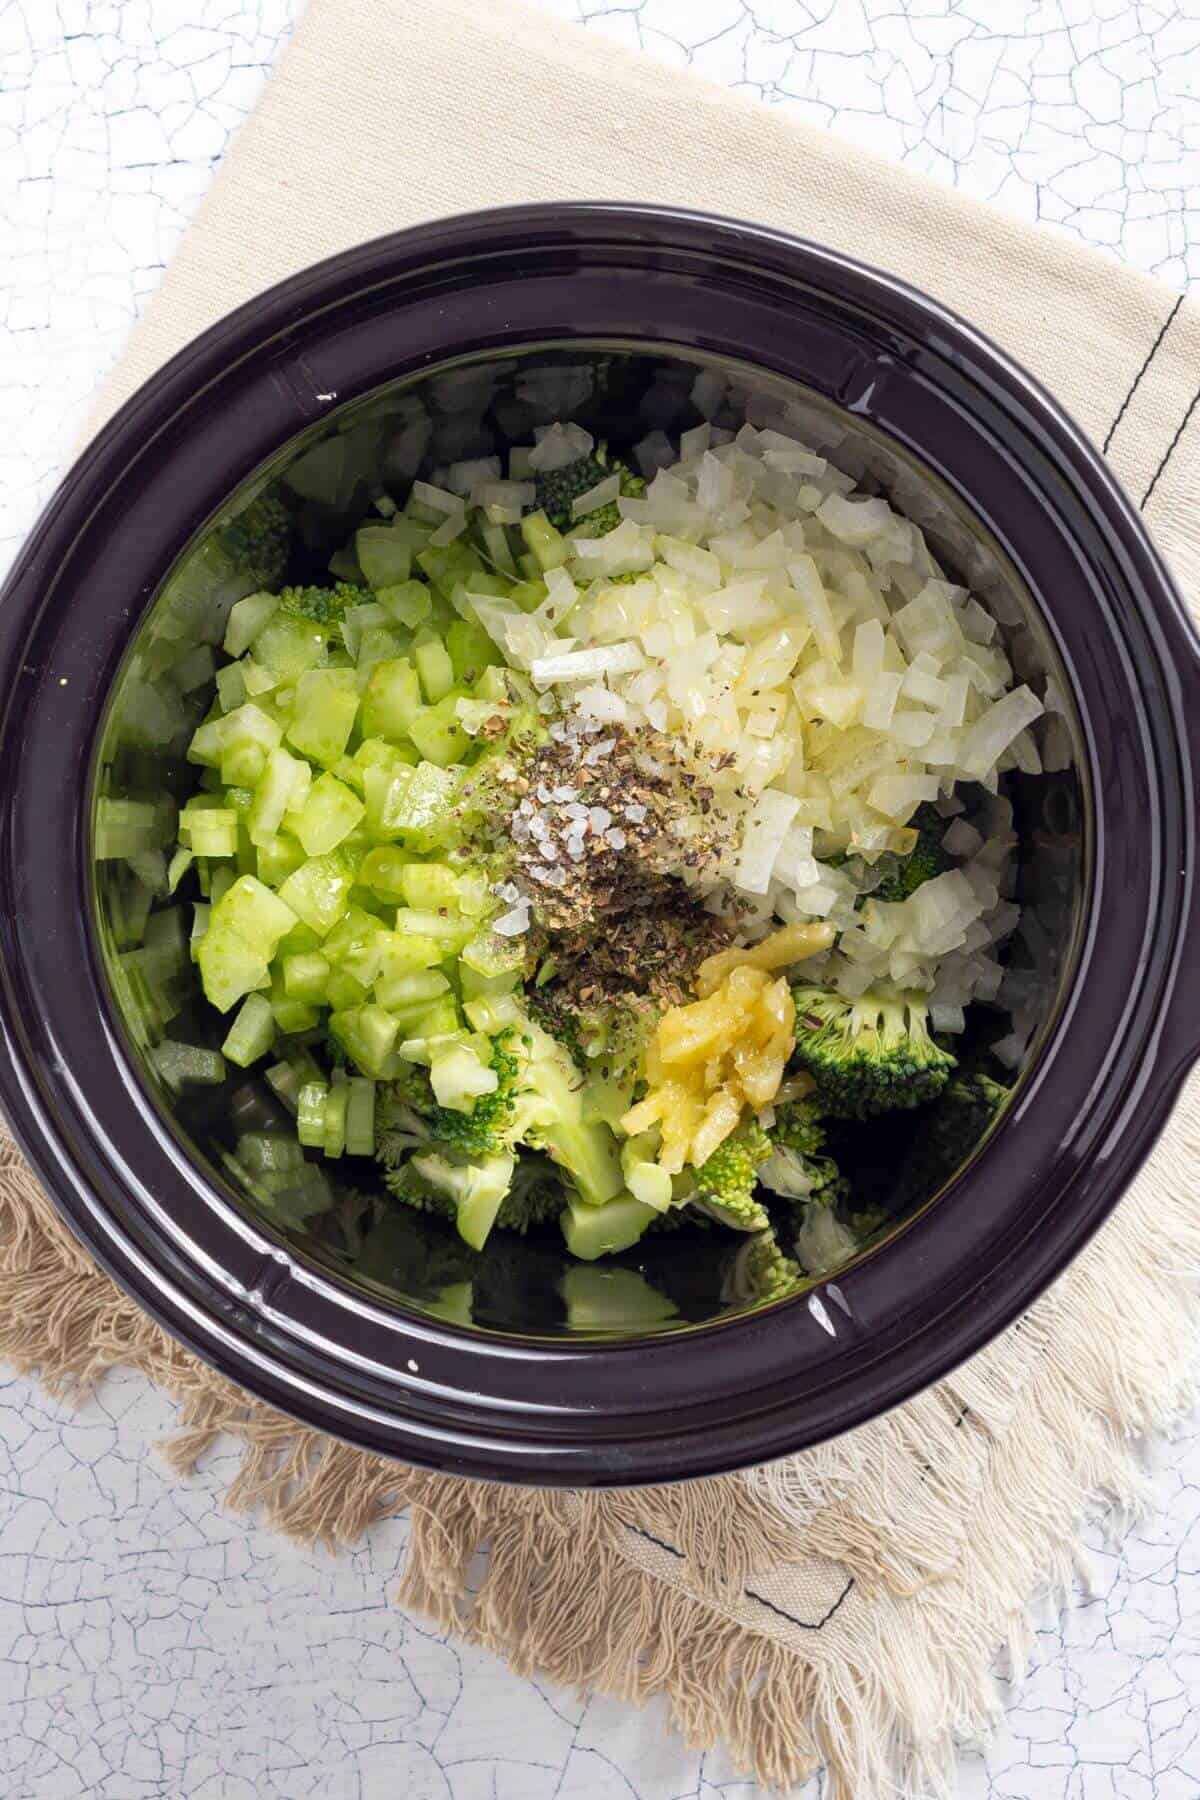 A black crock pot filled with broccoli, onions, and seasonings.